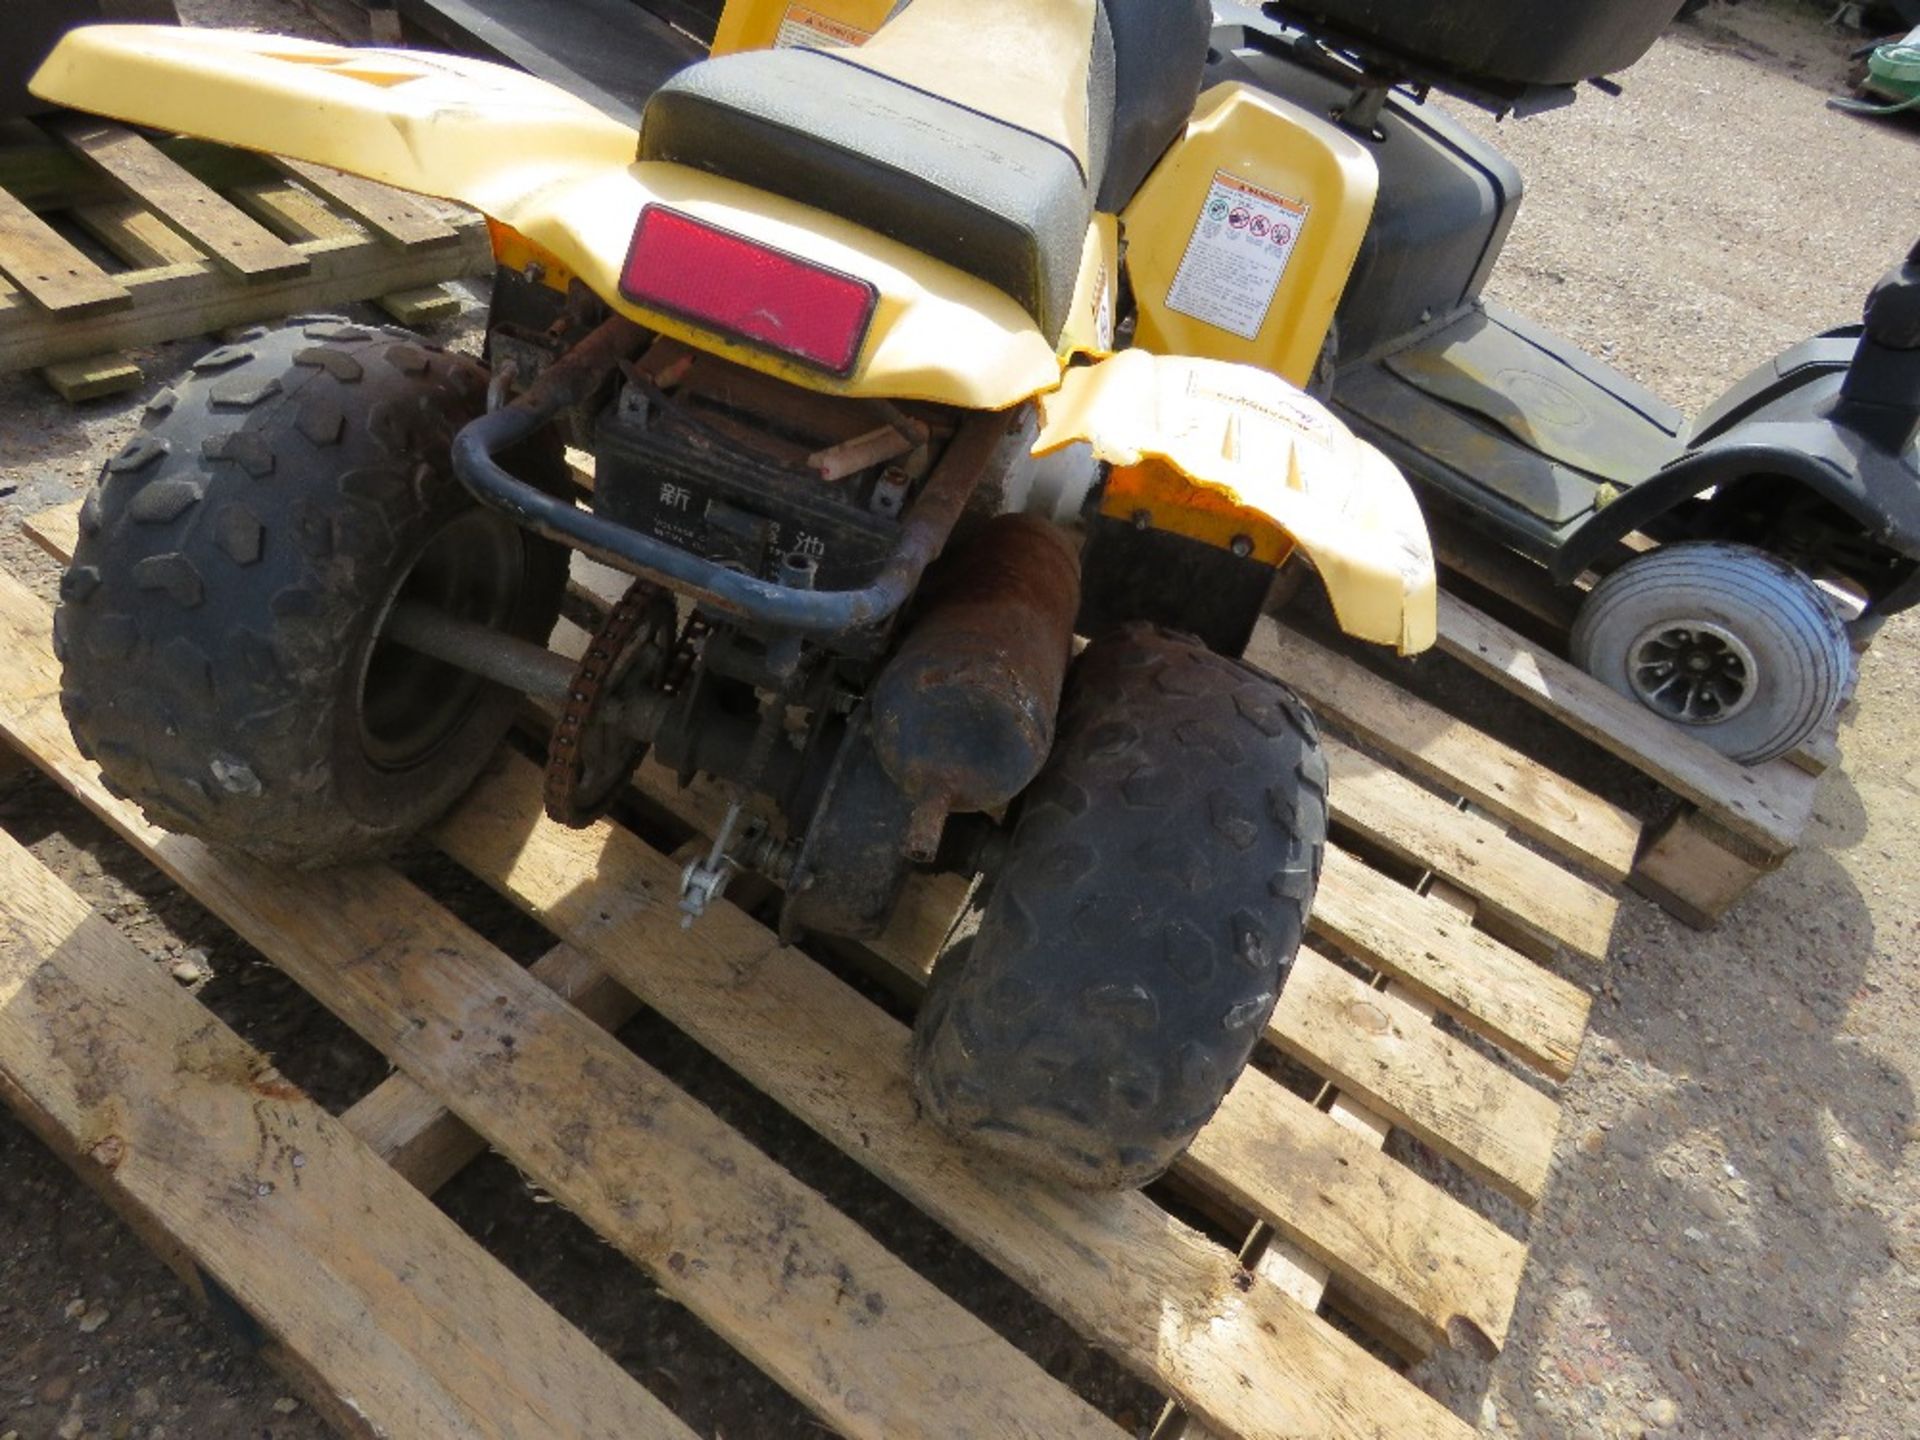 CHILD'S PETROL ENGINED QUAD BIKE, CONDITION UNKNOWN. - Image 2 of 3